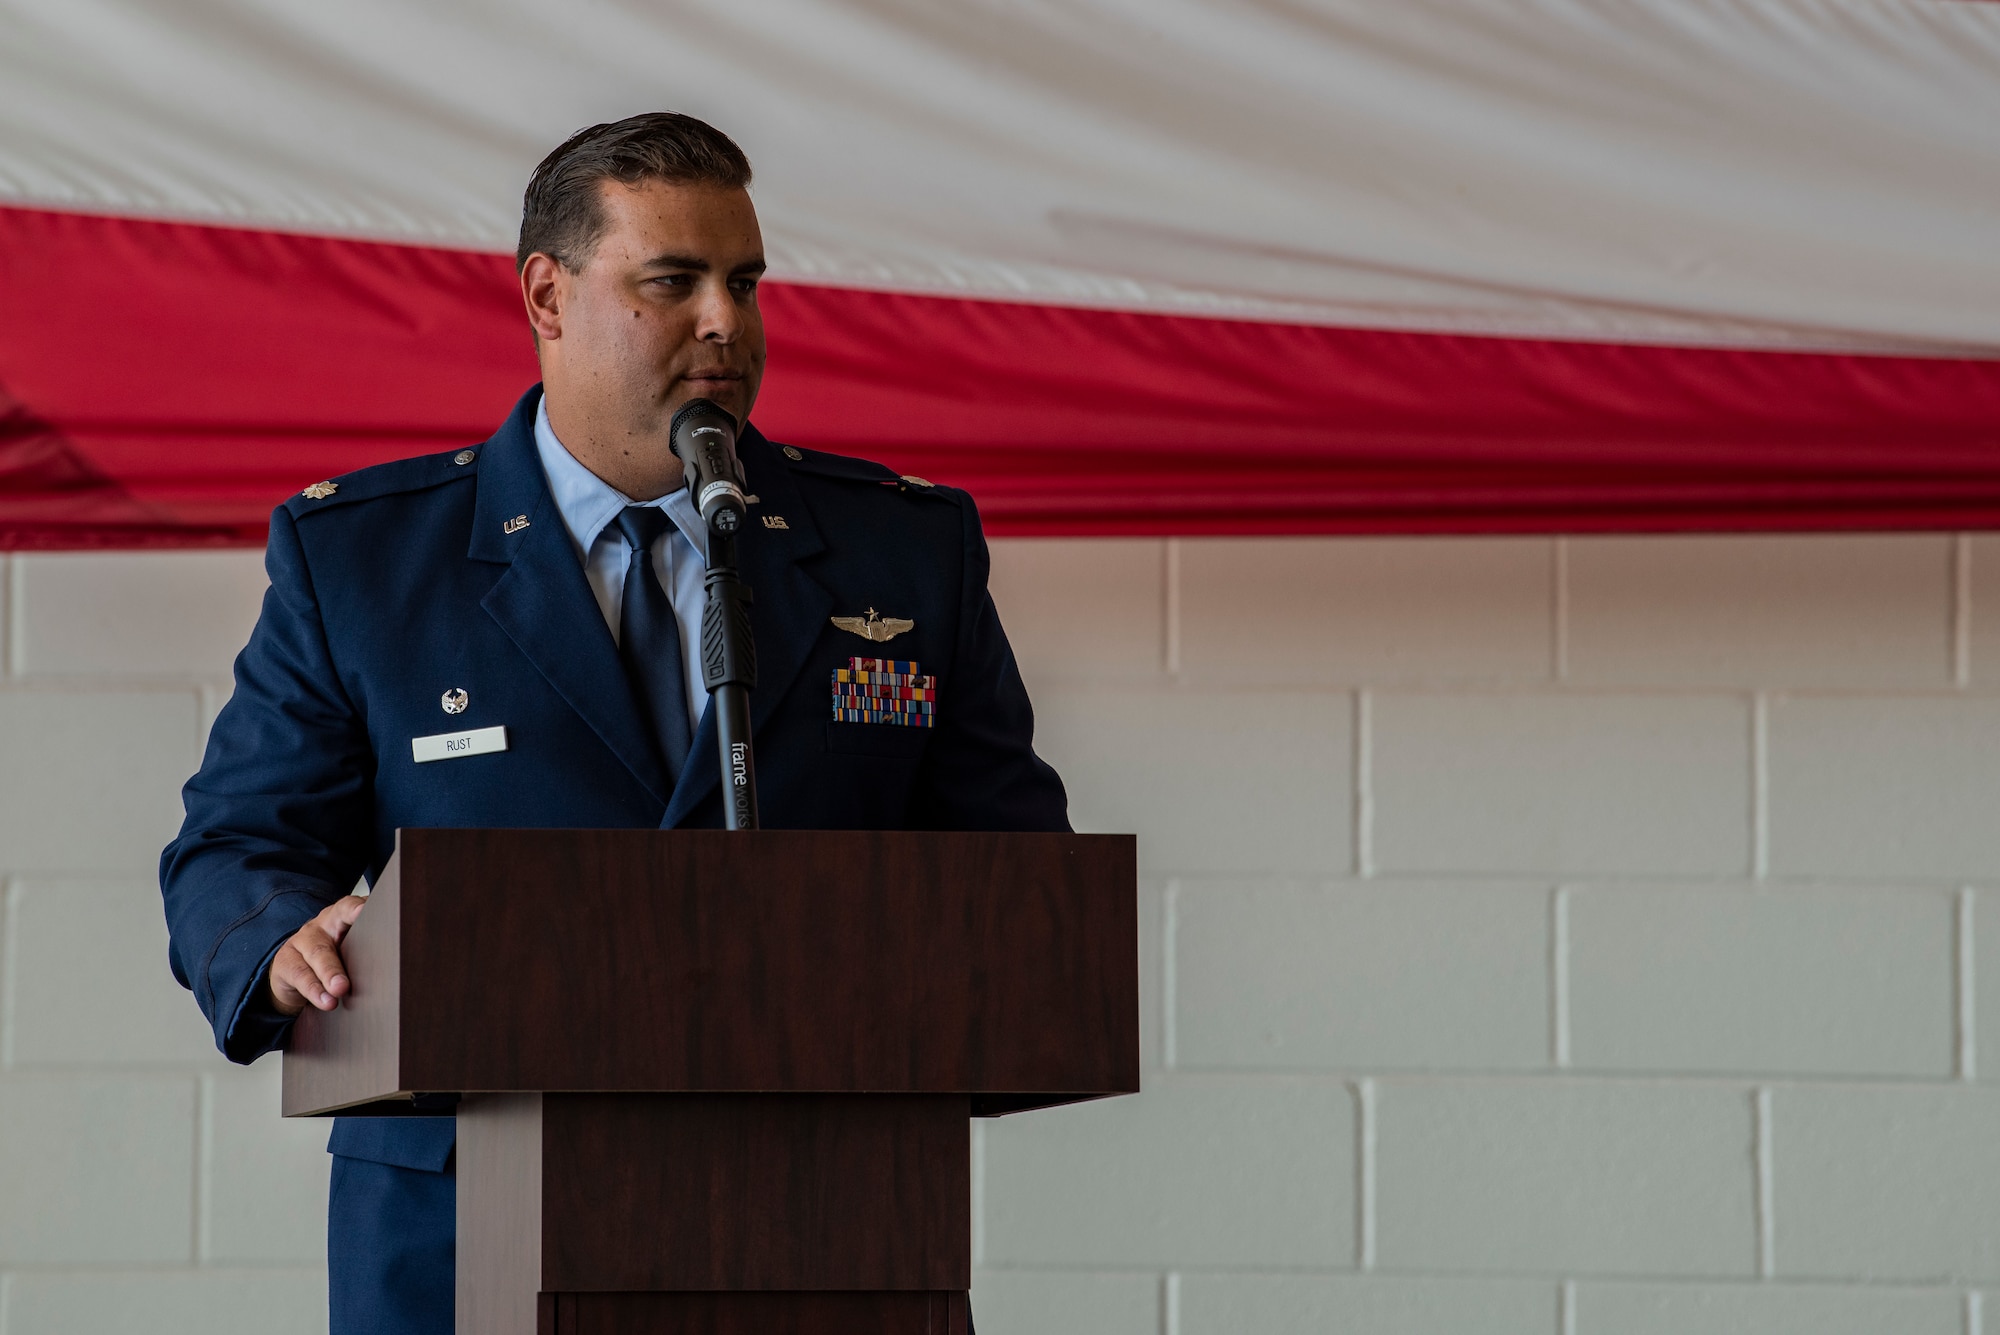 Lt. Col. Austin Rust, 317th Operations Support Squadron commander, delivers remarks after assuming command of the squadron during the 317th OSS change of command ceremony at Dyess Air Force Base, Texas, June 30, 2022. Rust arrived at Dyess in March of 2021 as the director of operations for the 40th Airlift Squadron before assuming command of the 317th OSS. (U.S. Air Force photo by Airman 1st Class Ryan Hayman)